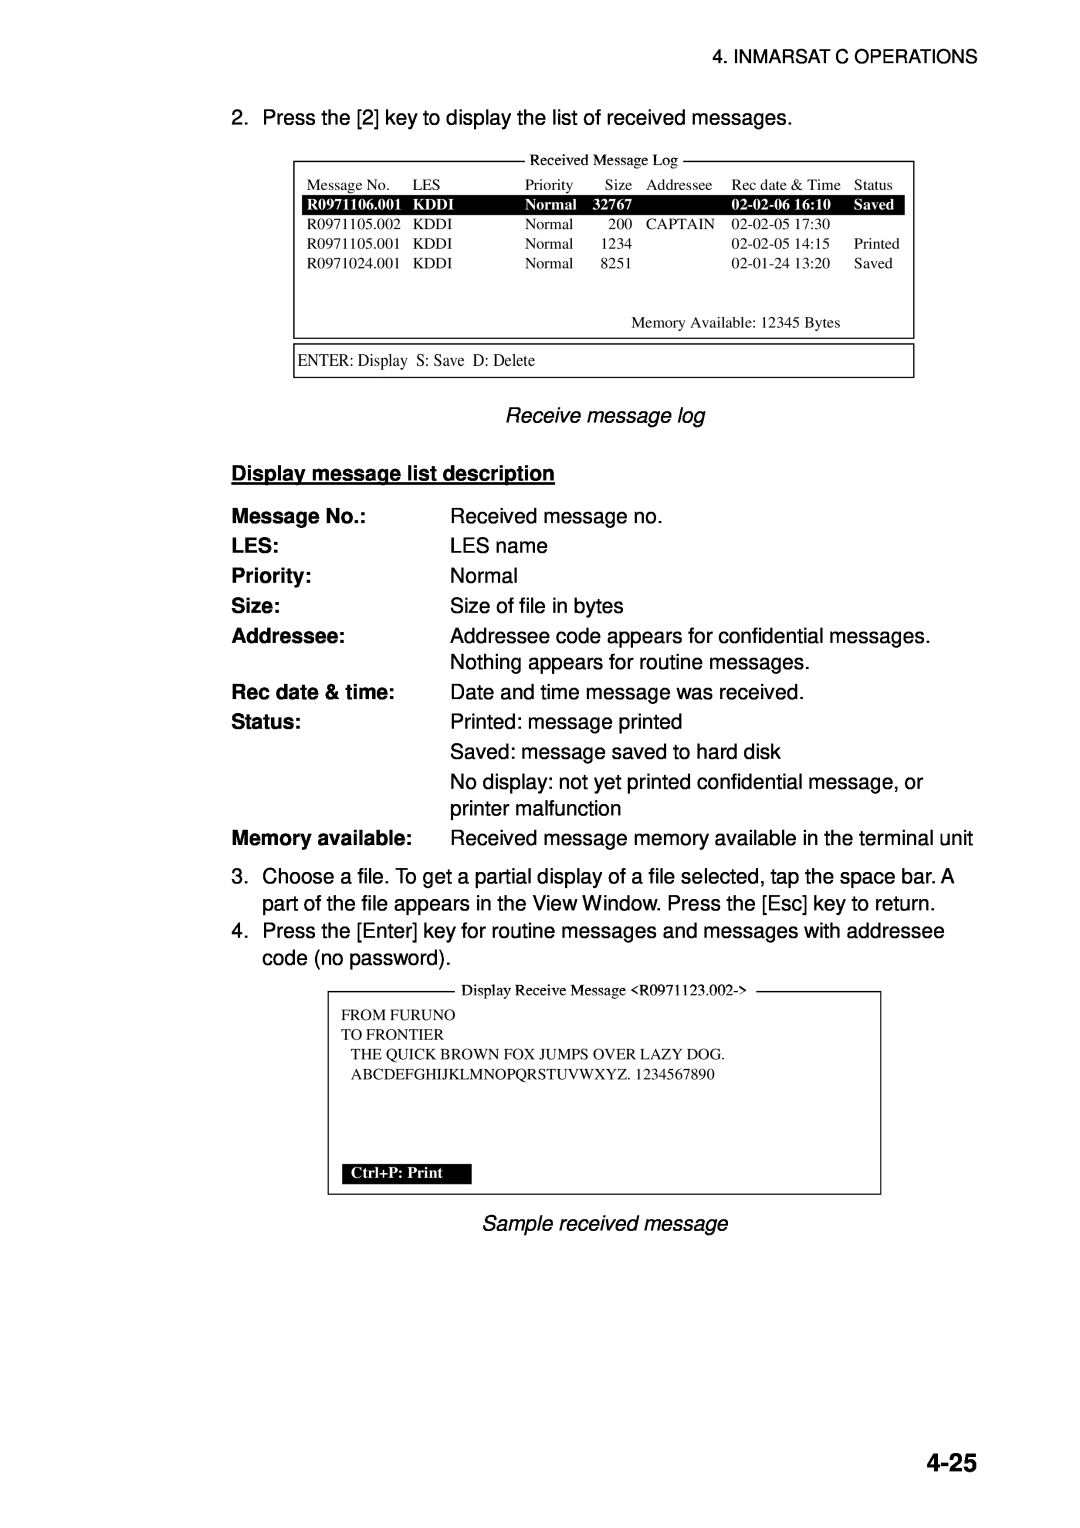 Furuno 16 manual 4-25, Display message list description, Message No, Priority, Size, Addressee, Rec date & time, Status 